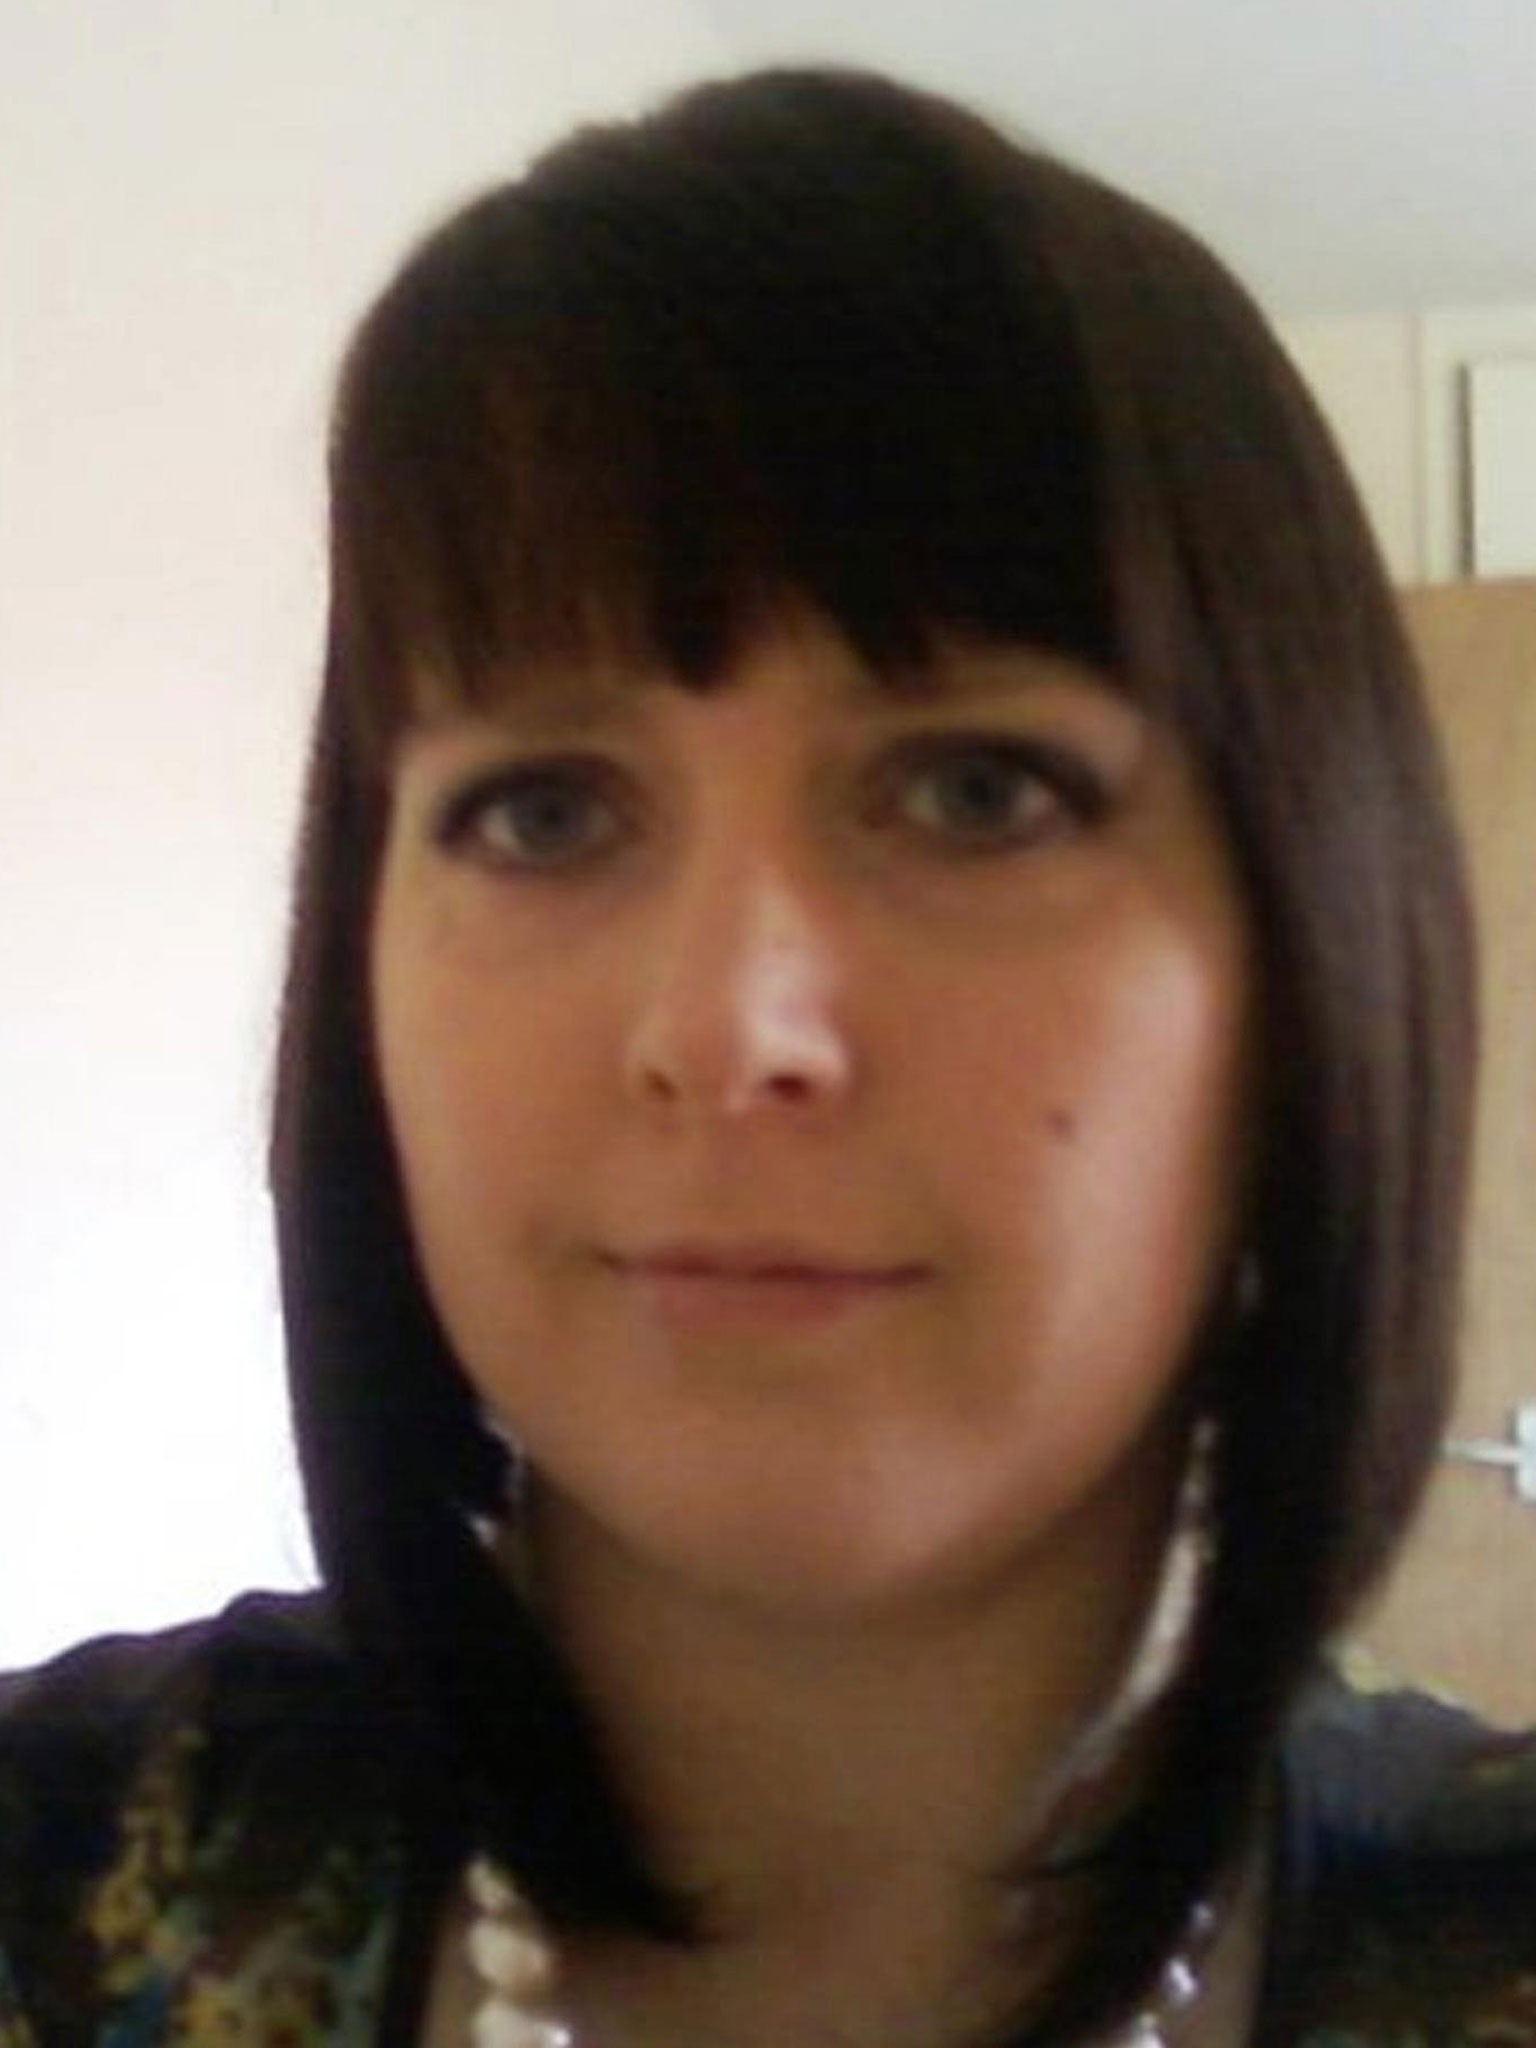 Clare’s Law was introduced following a campaign by the family of Clare Wood, pictured, who was murdered by her former partner George Appleton in 2009